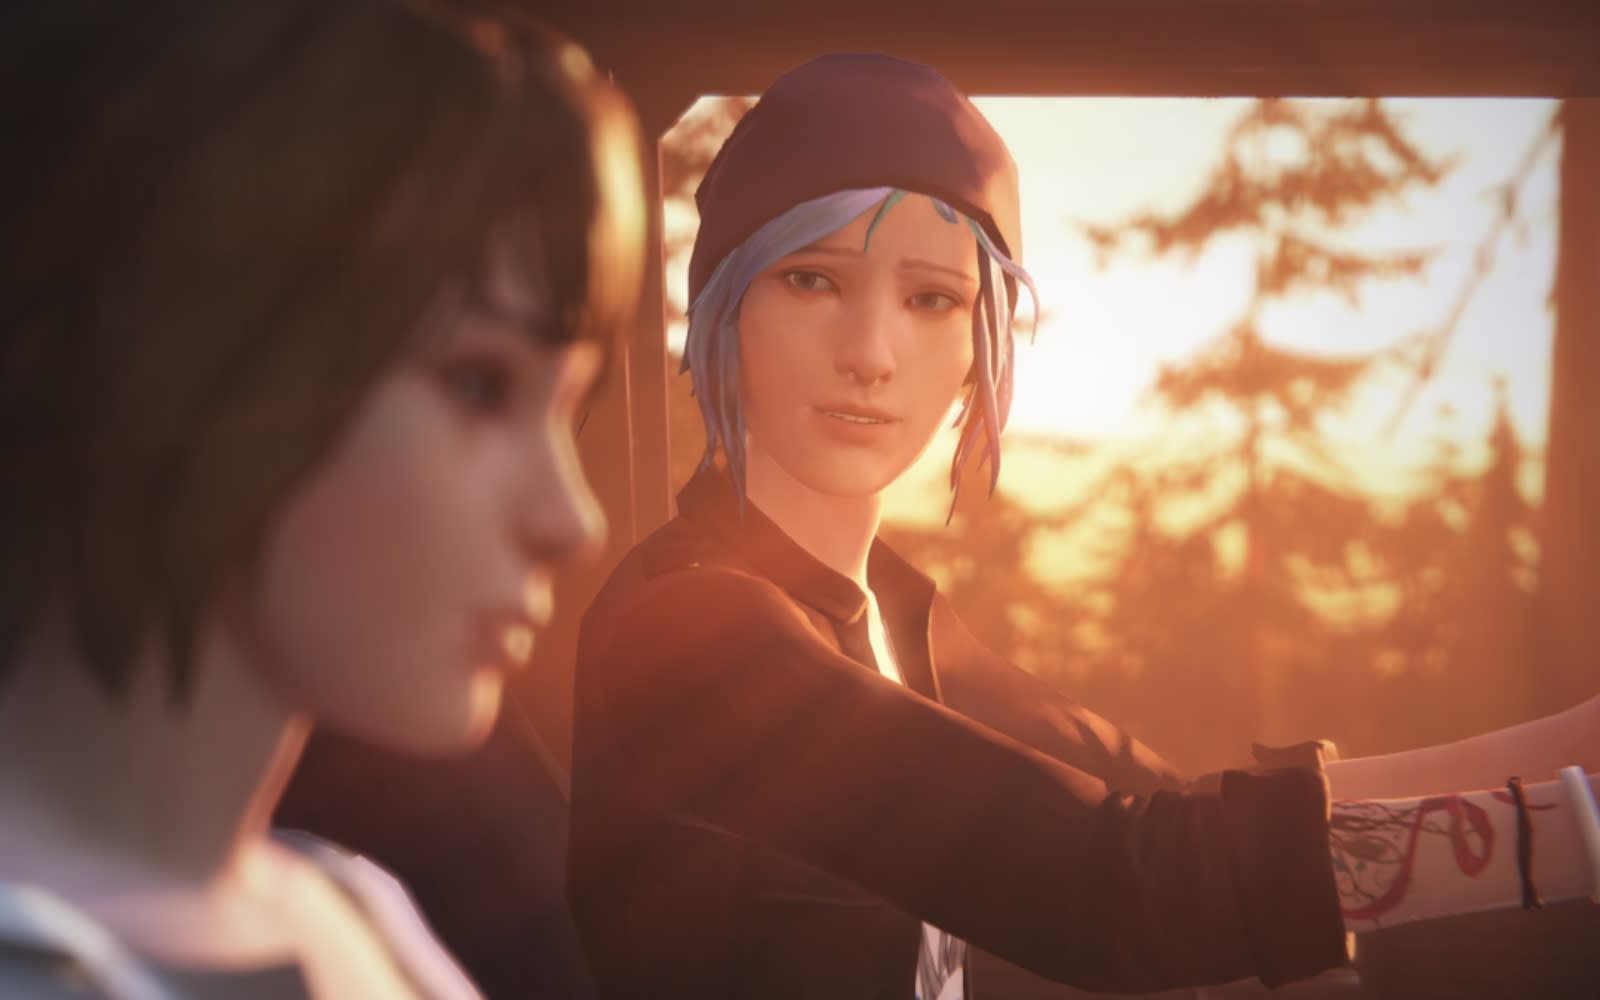 Square Enix will premiere the next Life is Strange game on March 18